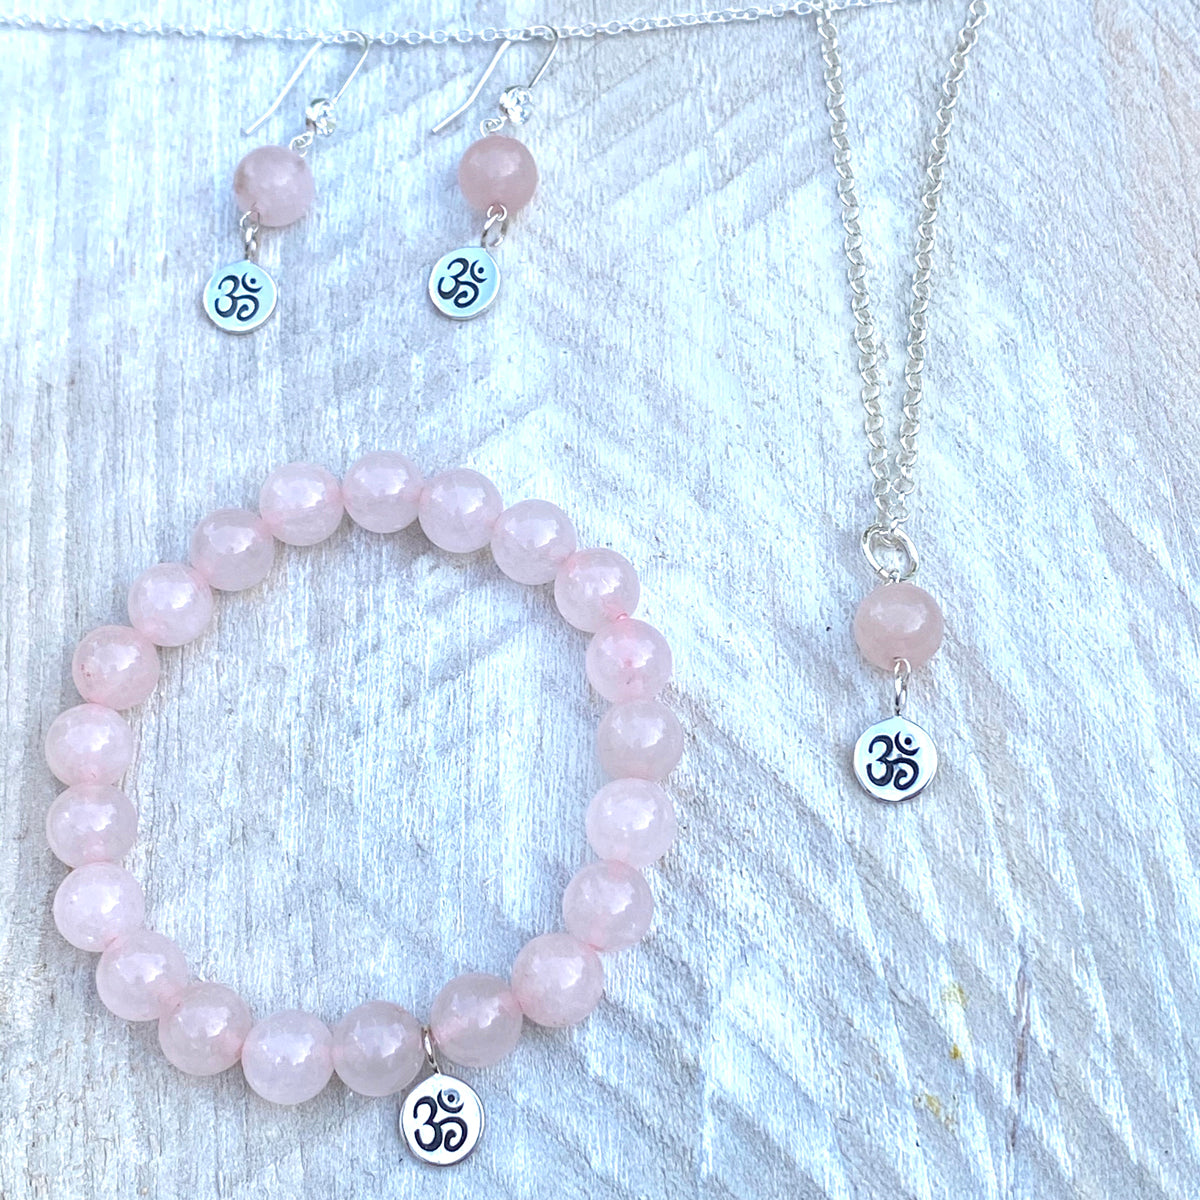 Sterling Silver Yoga Inspired Ohm Set with Rose Quartz to Hear the Sound of the Universe